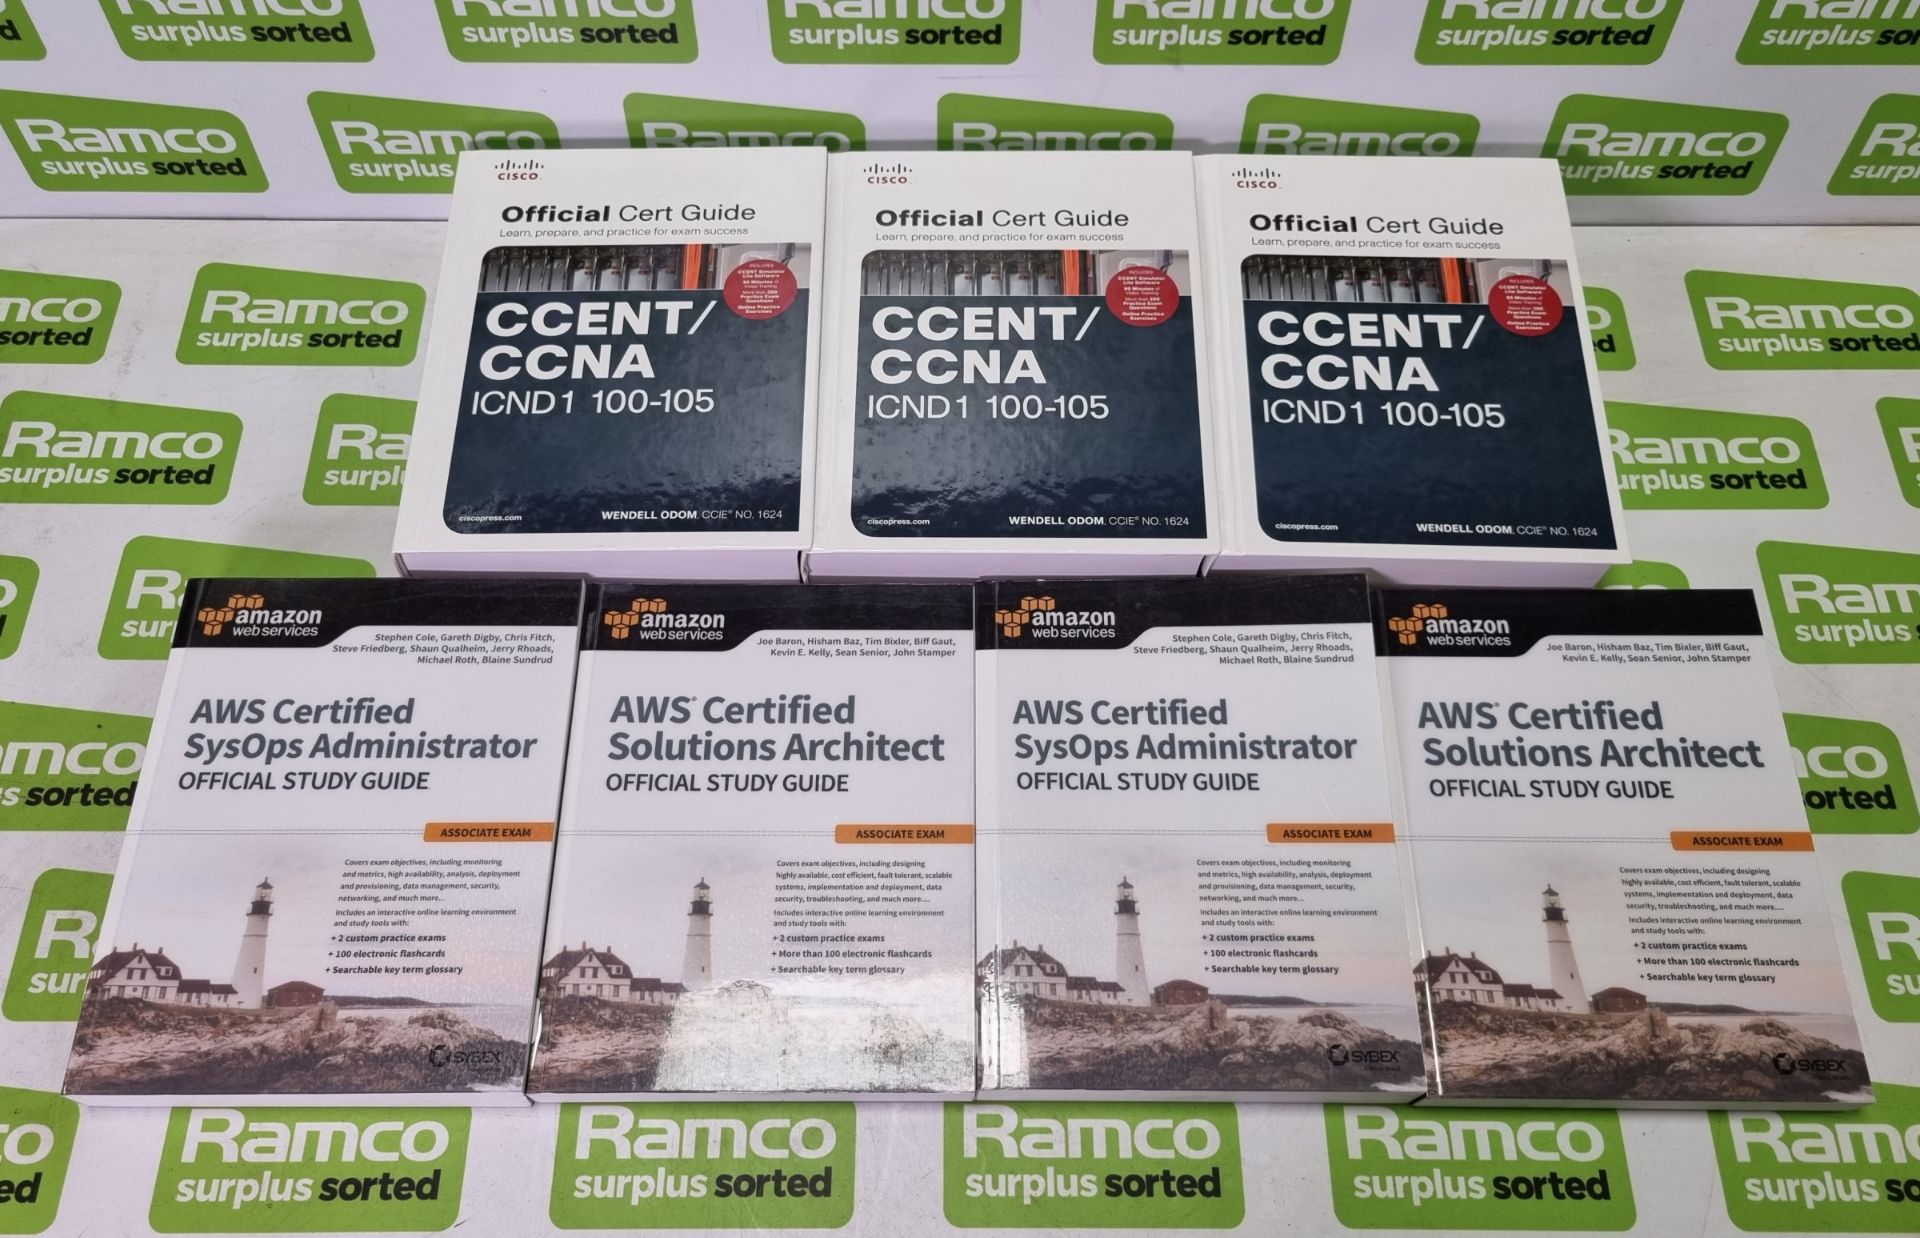 3x CCENT/CCNA ICND1 100-105 Official Cert Guide, 2x AWS Certified SysOps Administrator Official Stud - Image 2 of 7